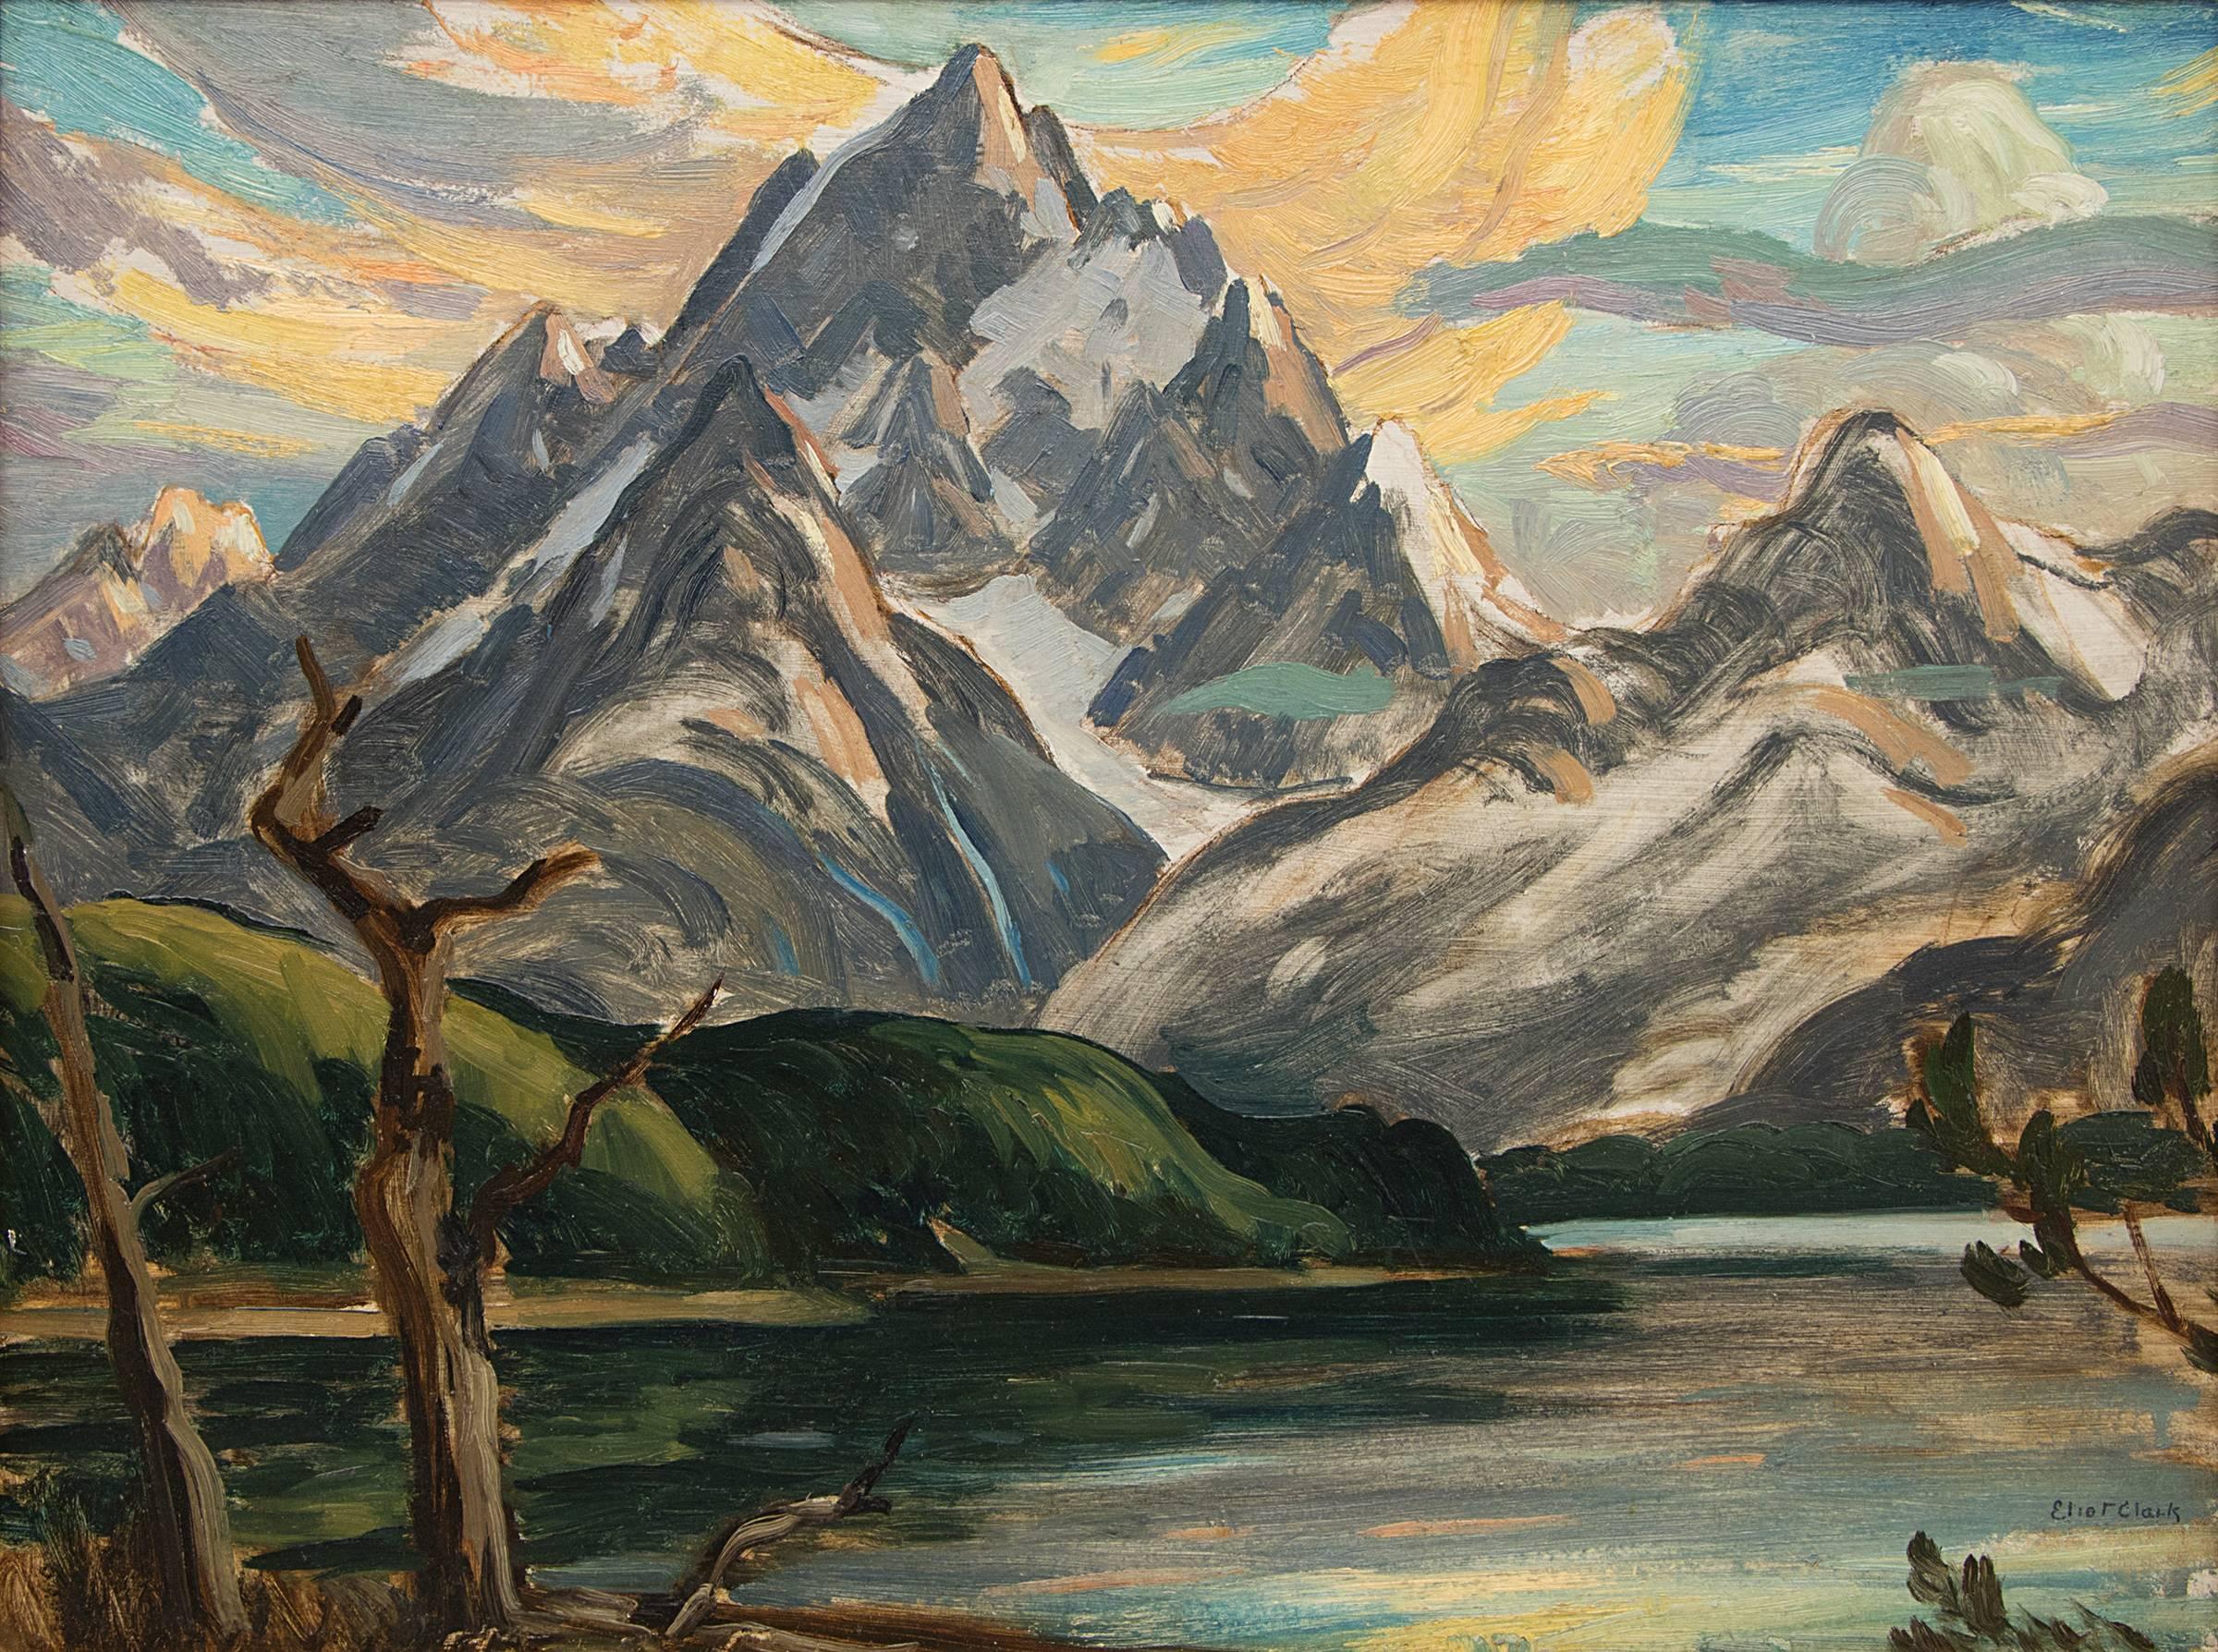 Untitled (The Grand Tetons and Jackson Lake, Wyoming Mountain Landscape) - Painting by Eliot Clark